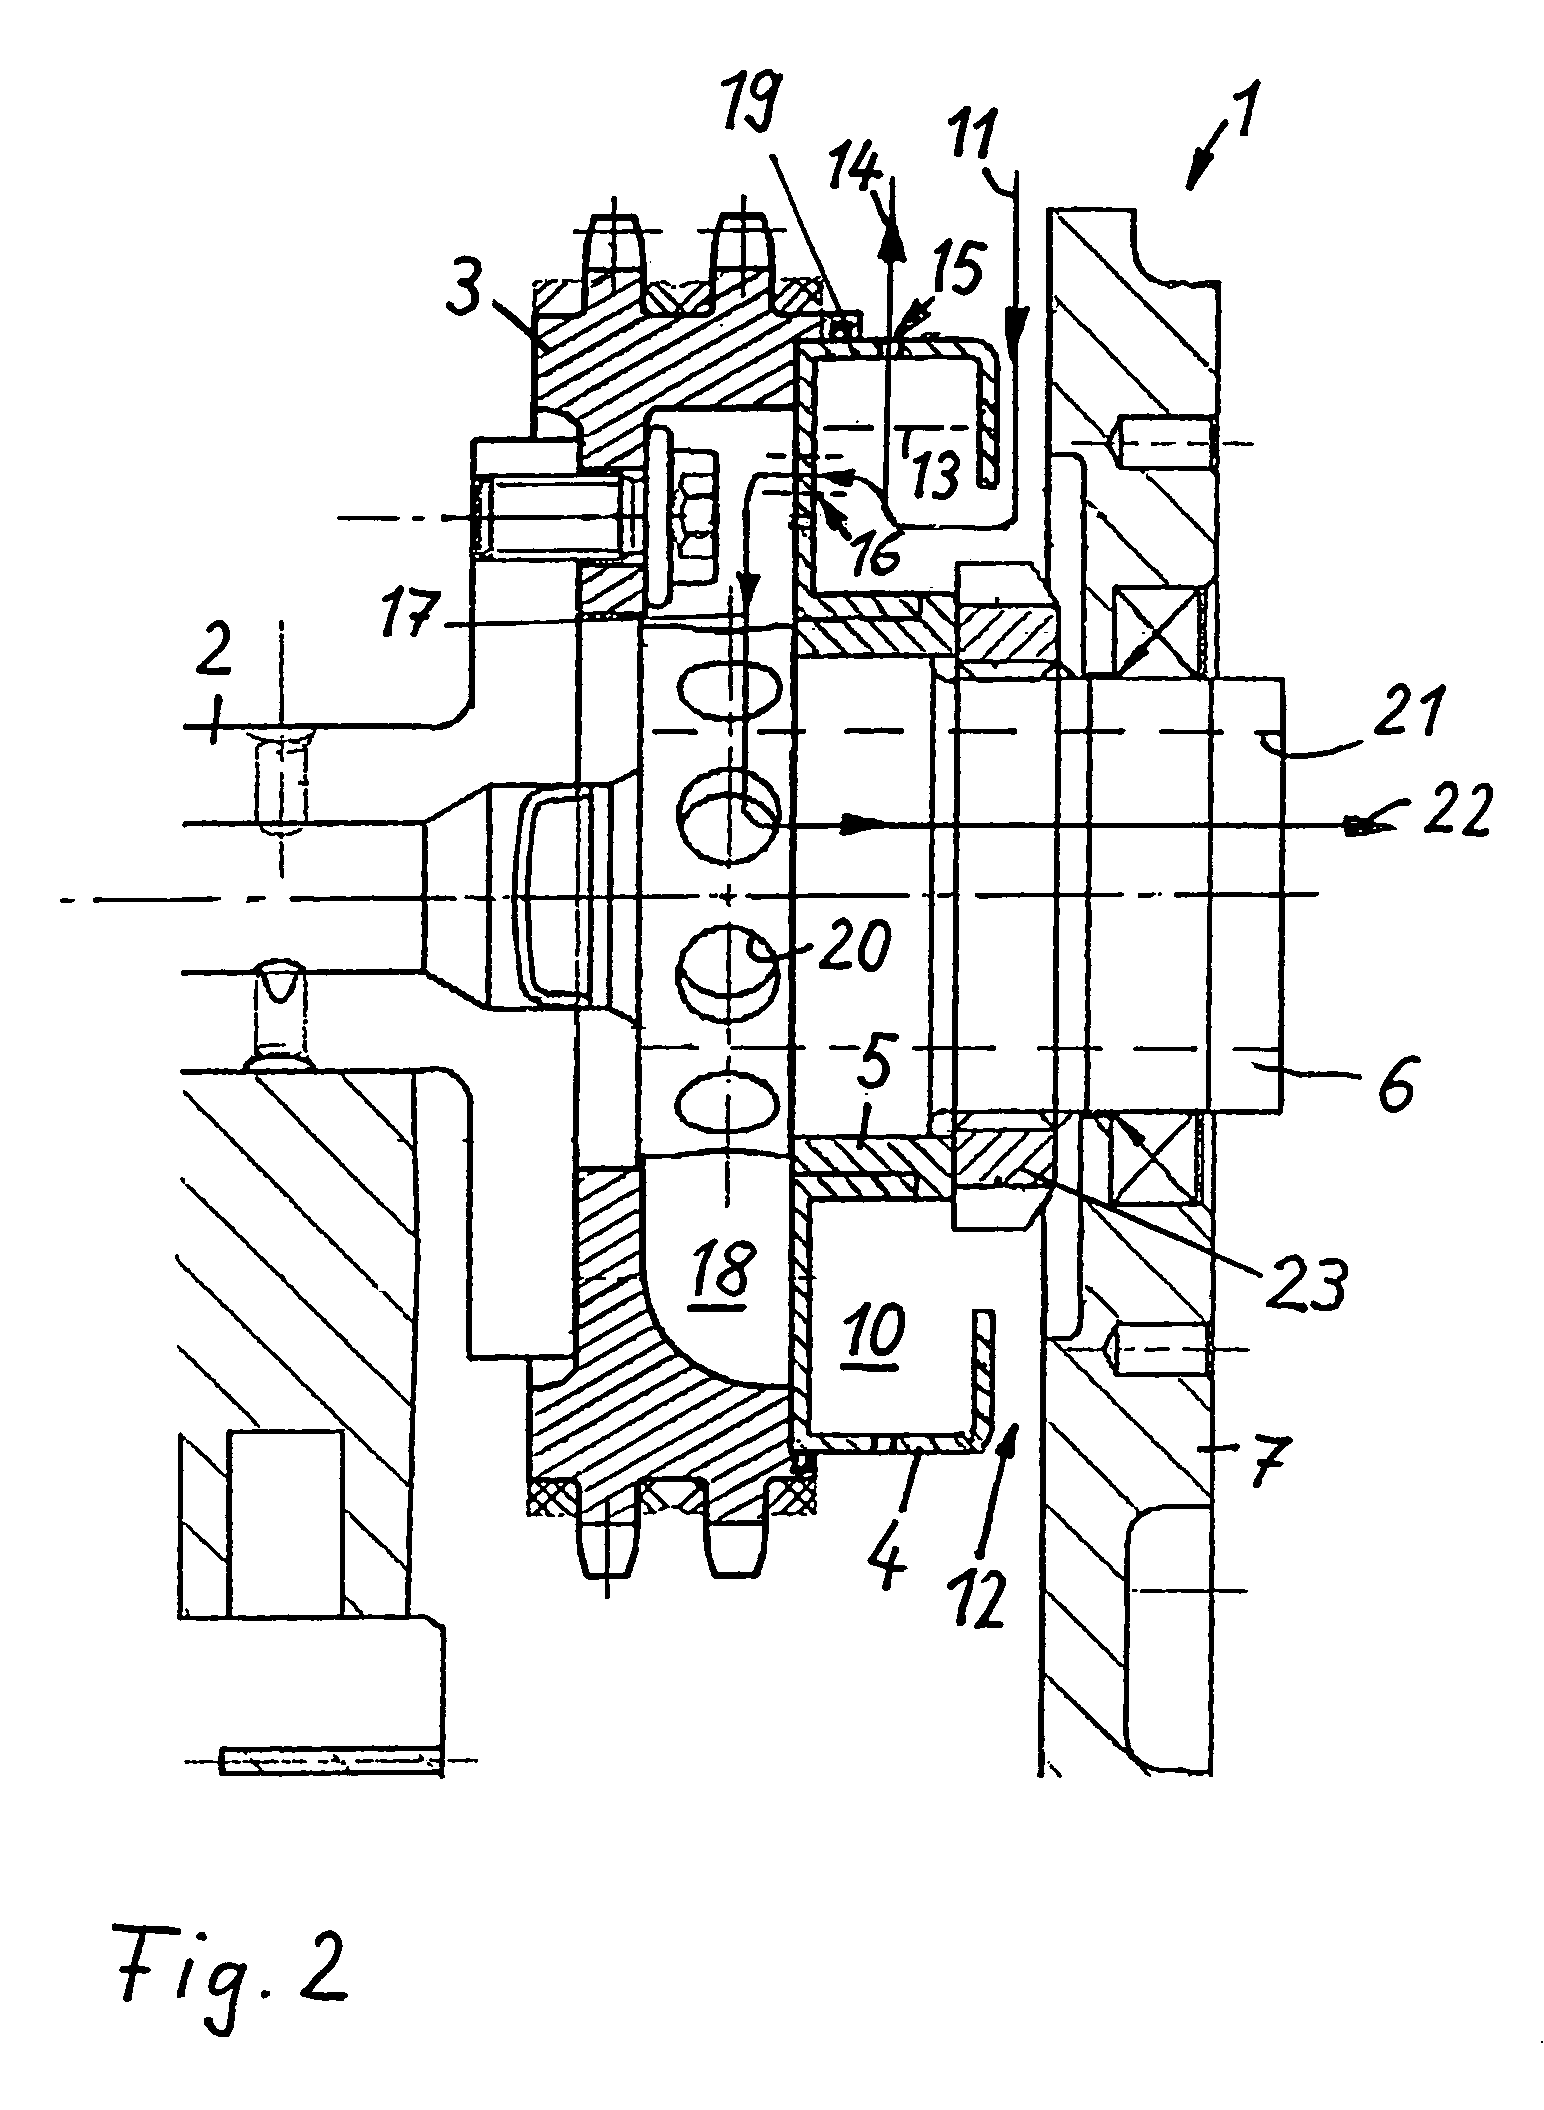 Centrifugal oil separator in an internal combustion engine